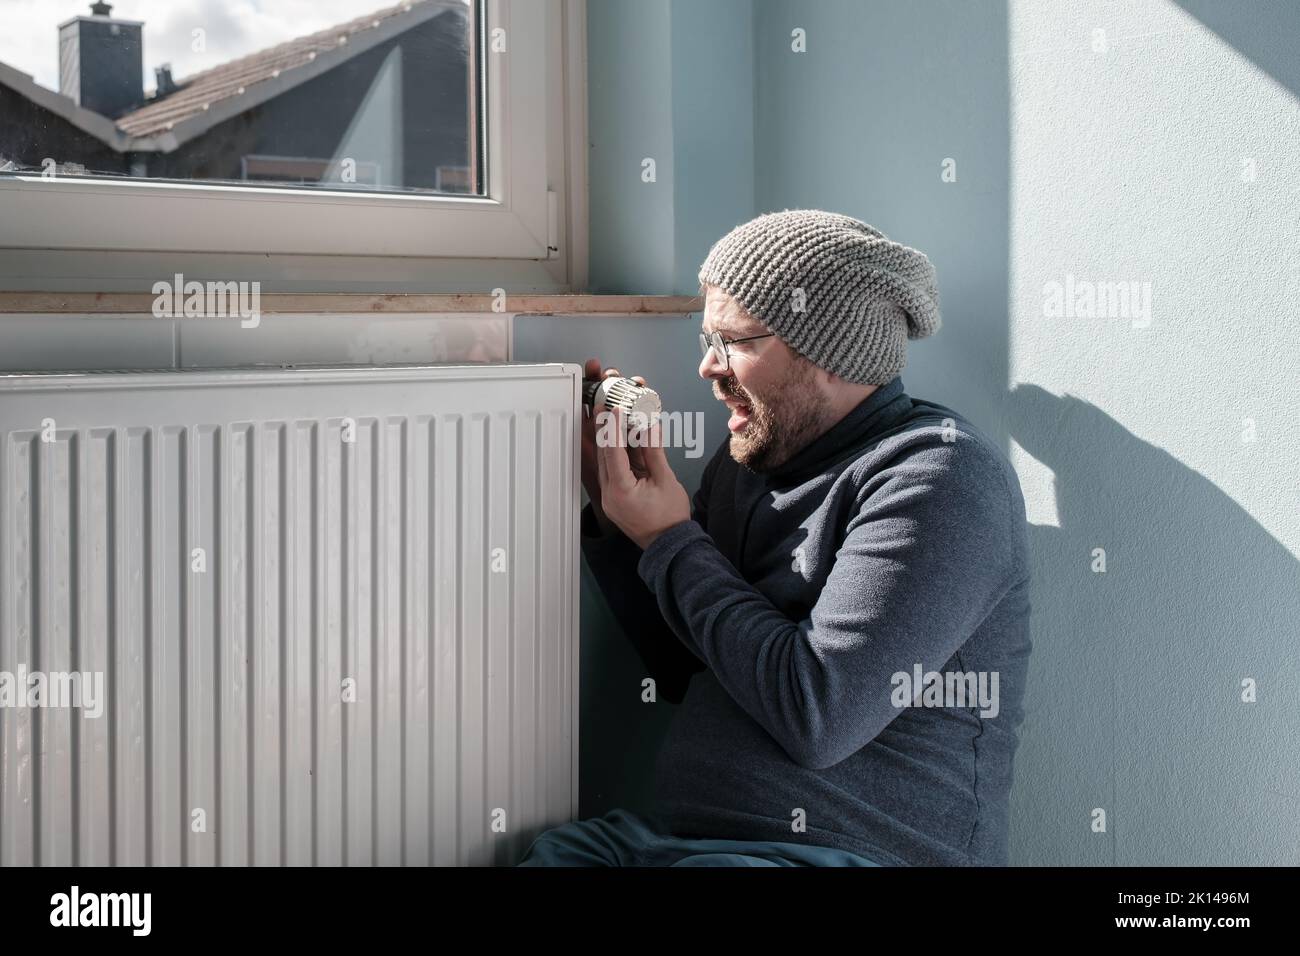 Irritated man in warm clothes turns the radiator thermostat to minimum. Concept of crisis and increase in fuel costs. Preparing for a cold winter. Stock Photo